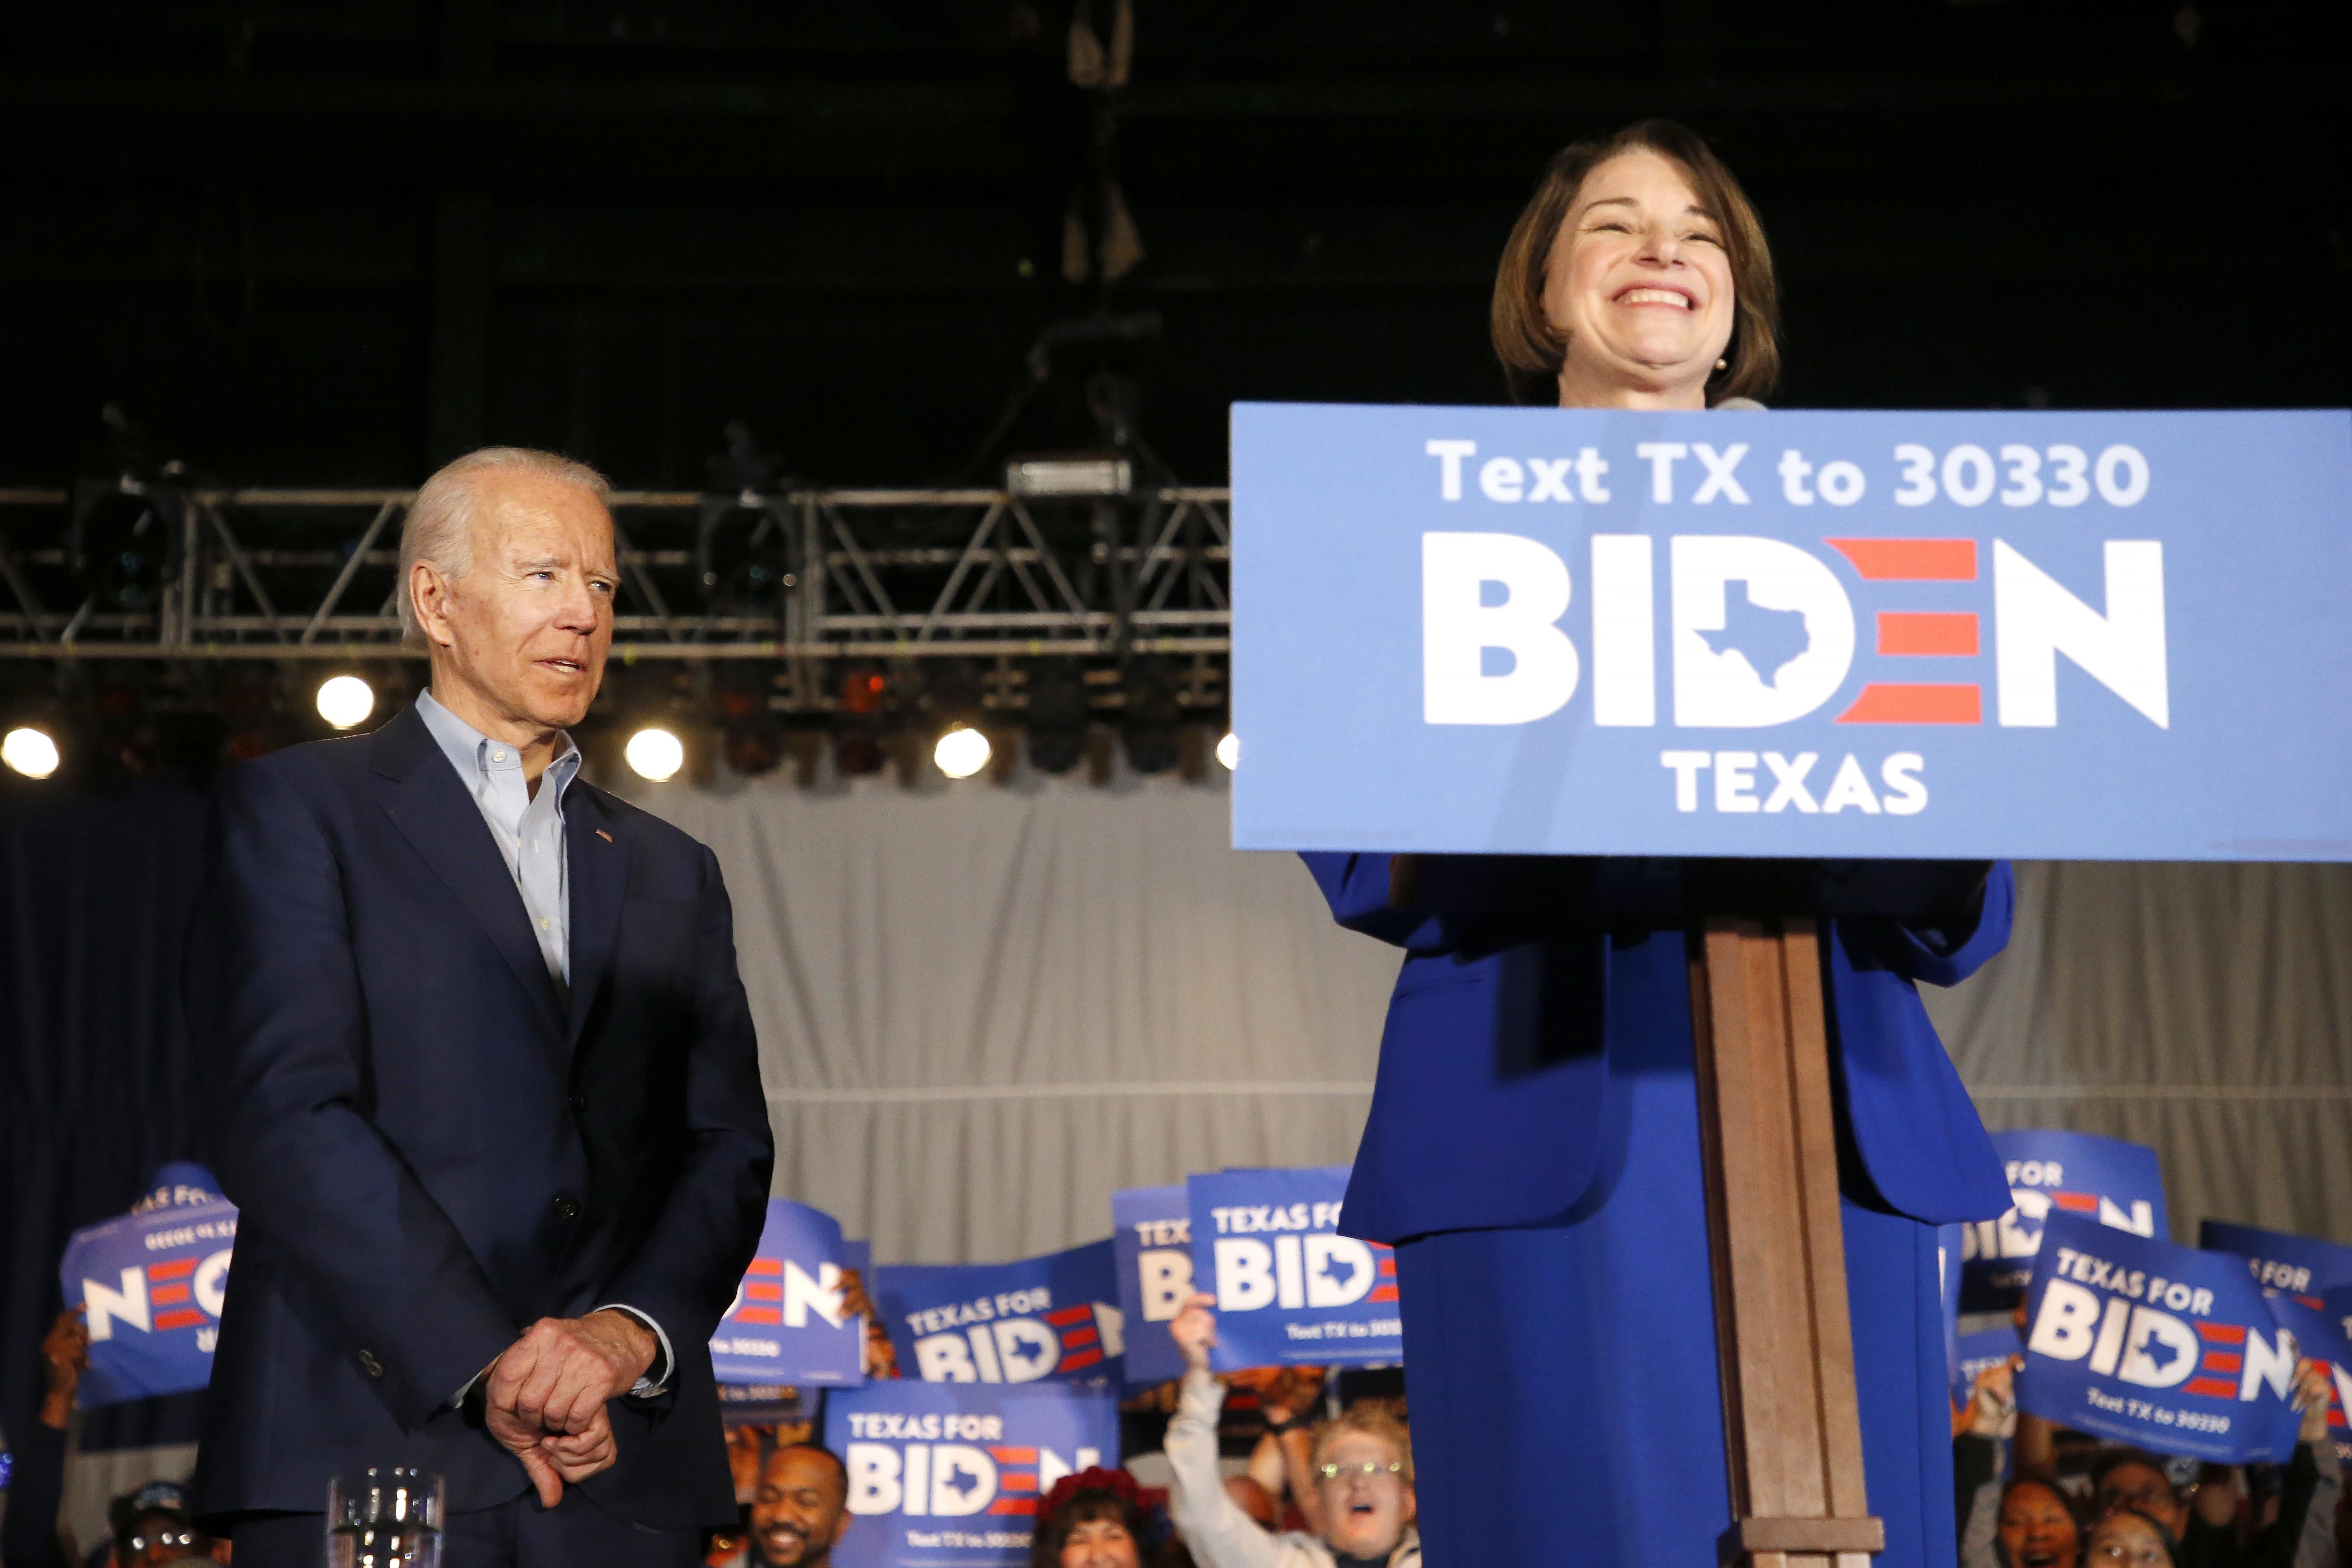 Klobuchar stands at the podium, smiling, as Biden looks on, with his supporters in the background.